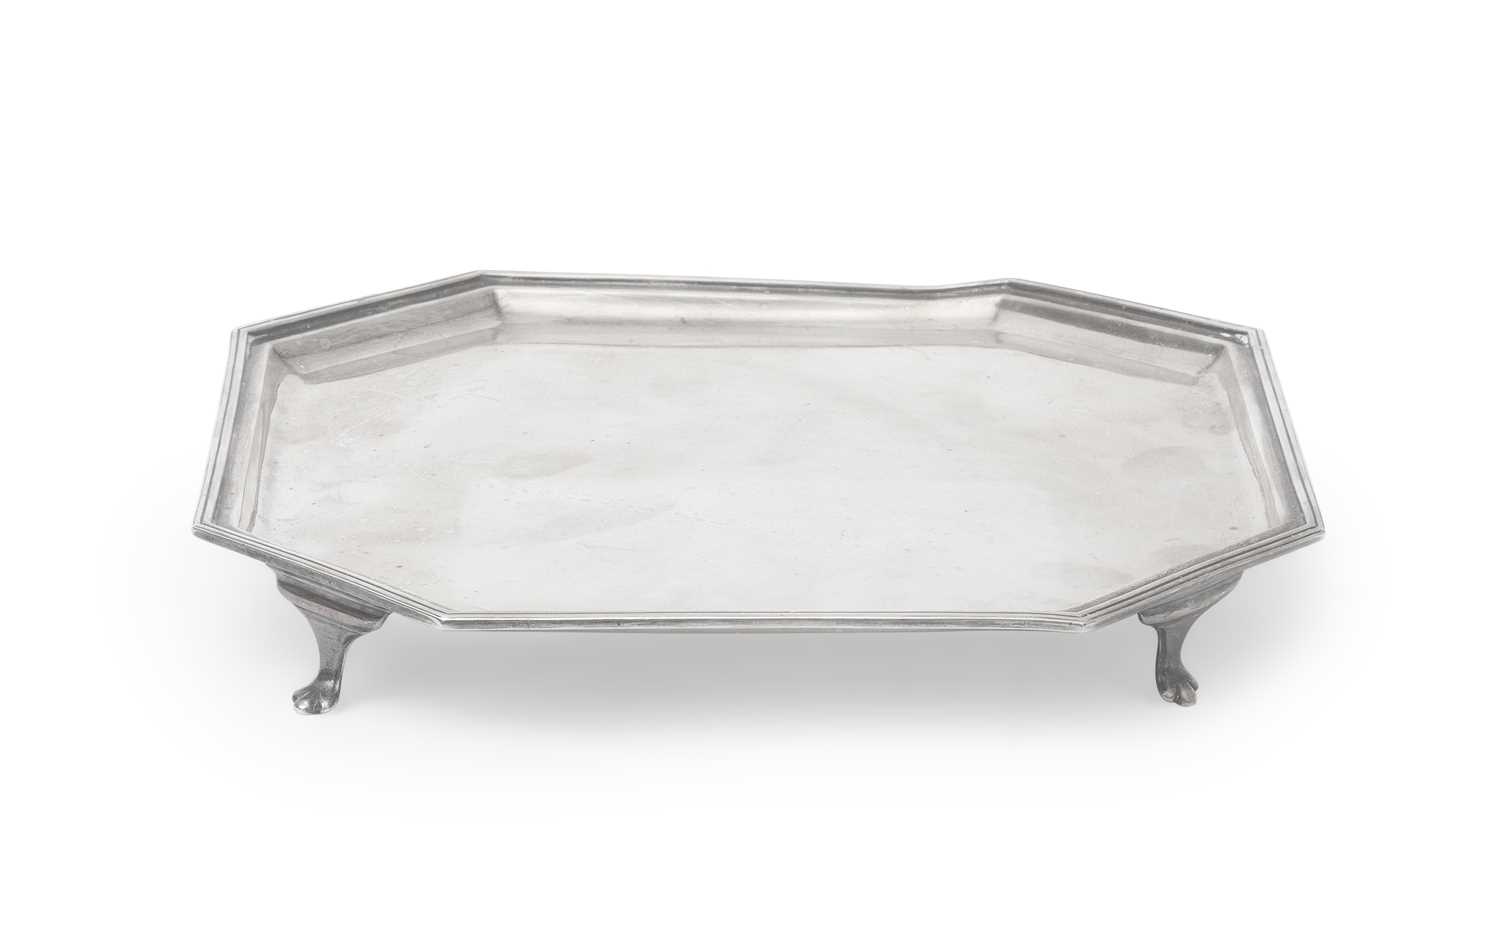 A SILVER PLATTER GIVEN TO SIR WILLIAM REID DICK R.A. IN 1927